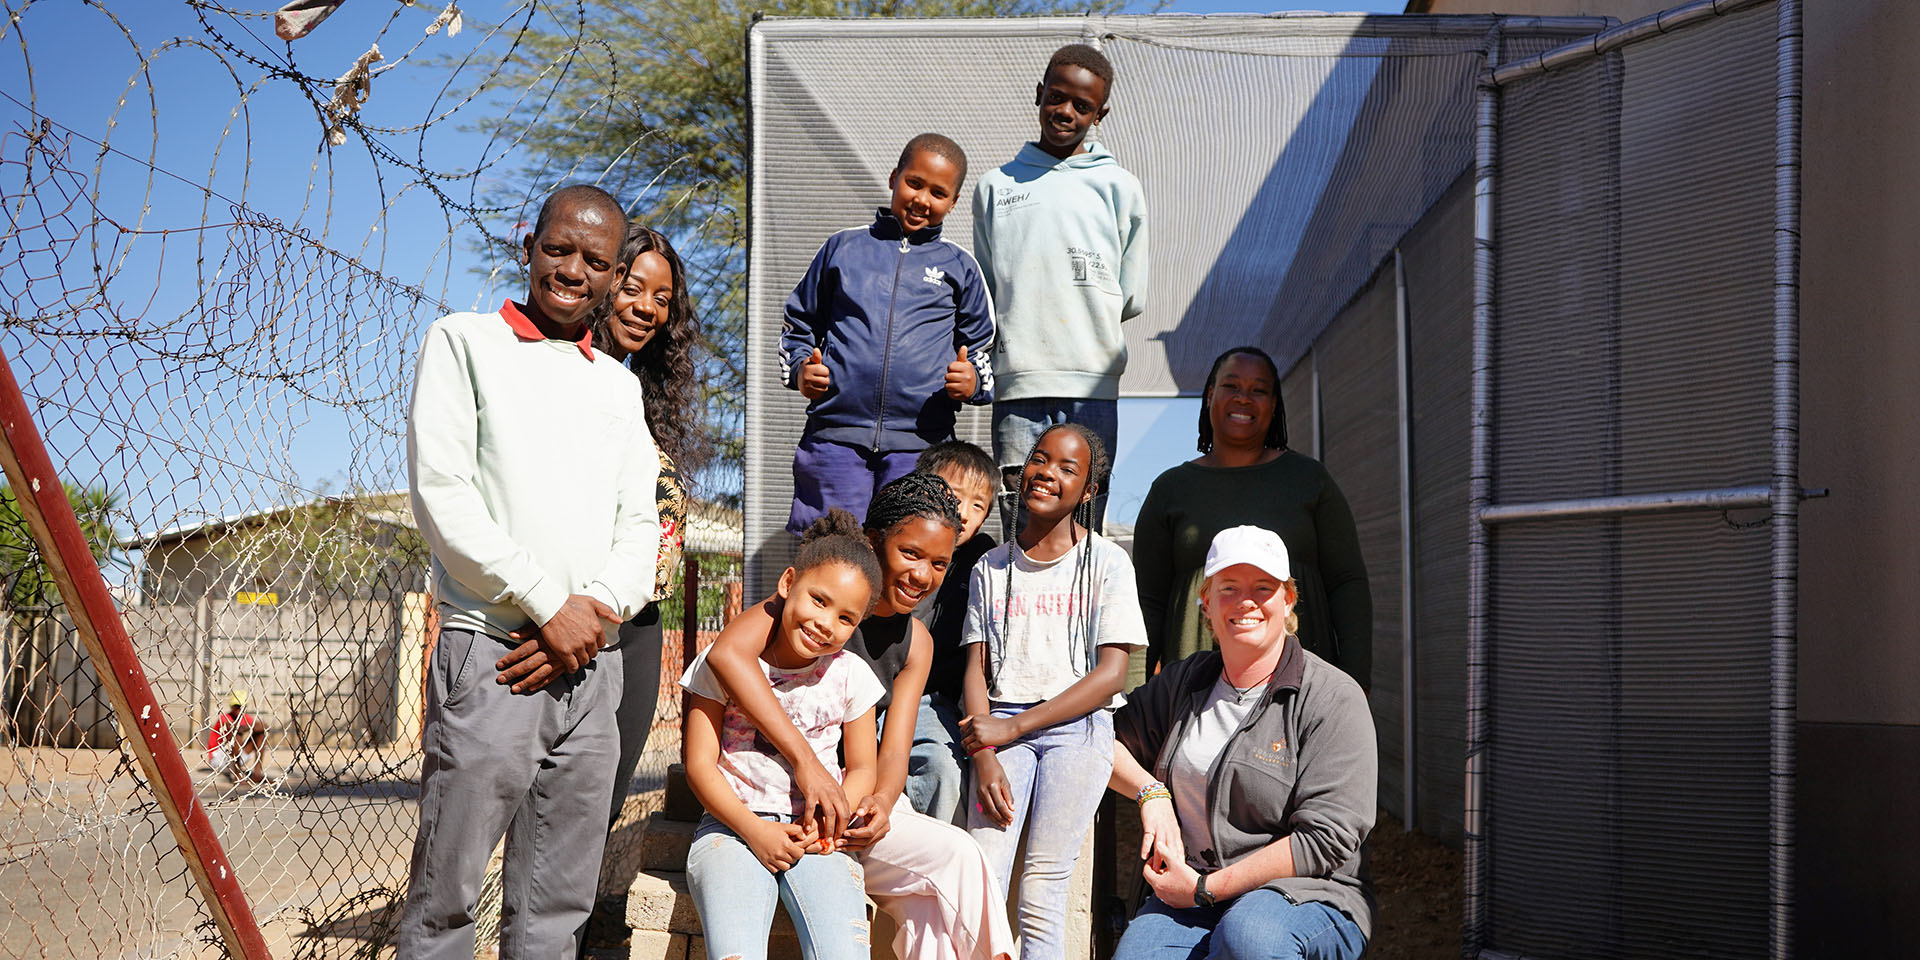 Smiling adults and children, The Lighthouse Community Hope, Namibia